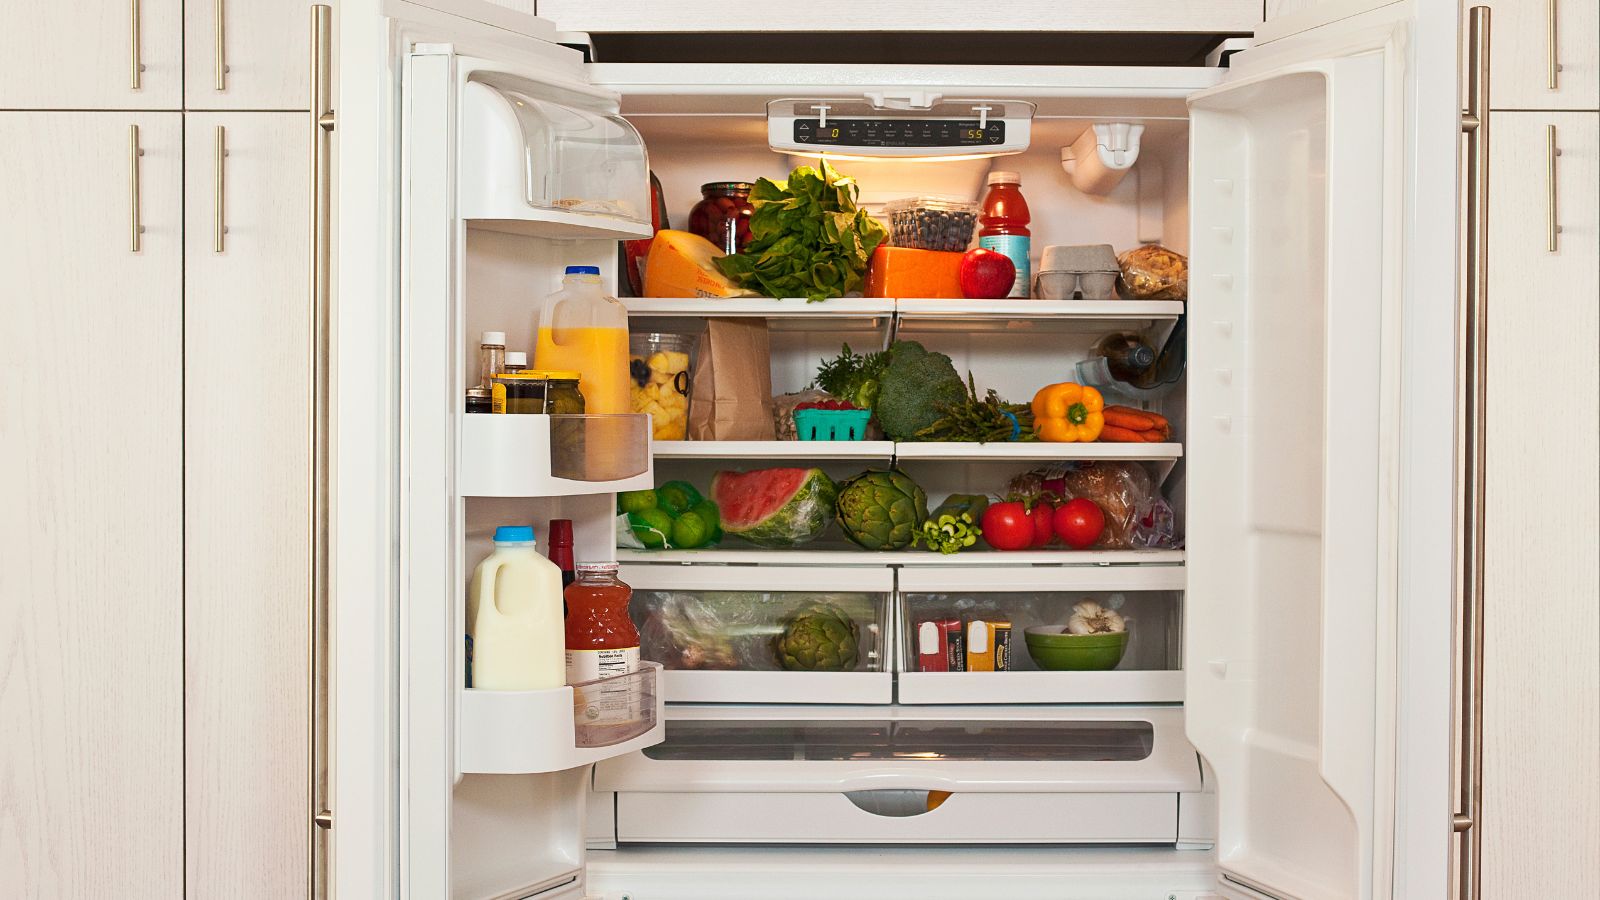 What to Do When Your Refrigerator Water Line Leaks, Water damage